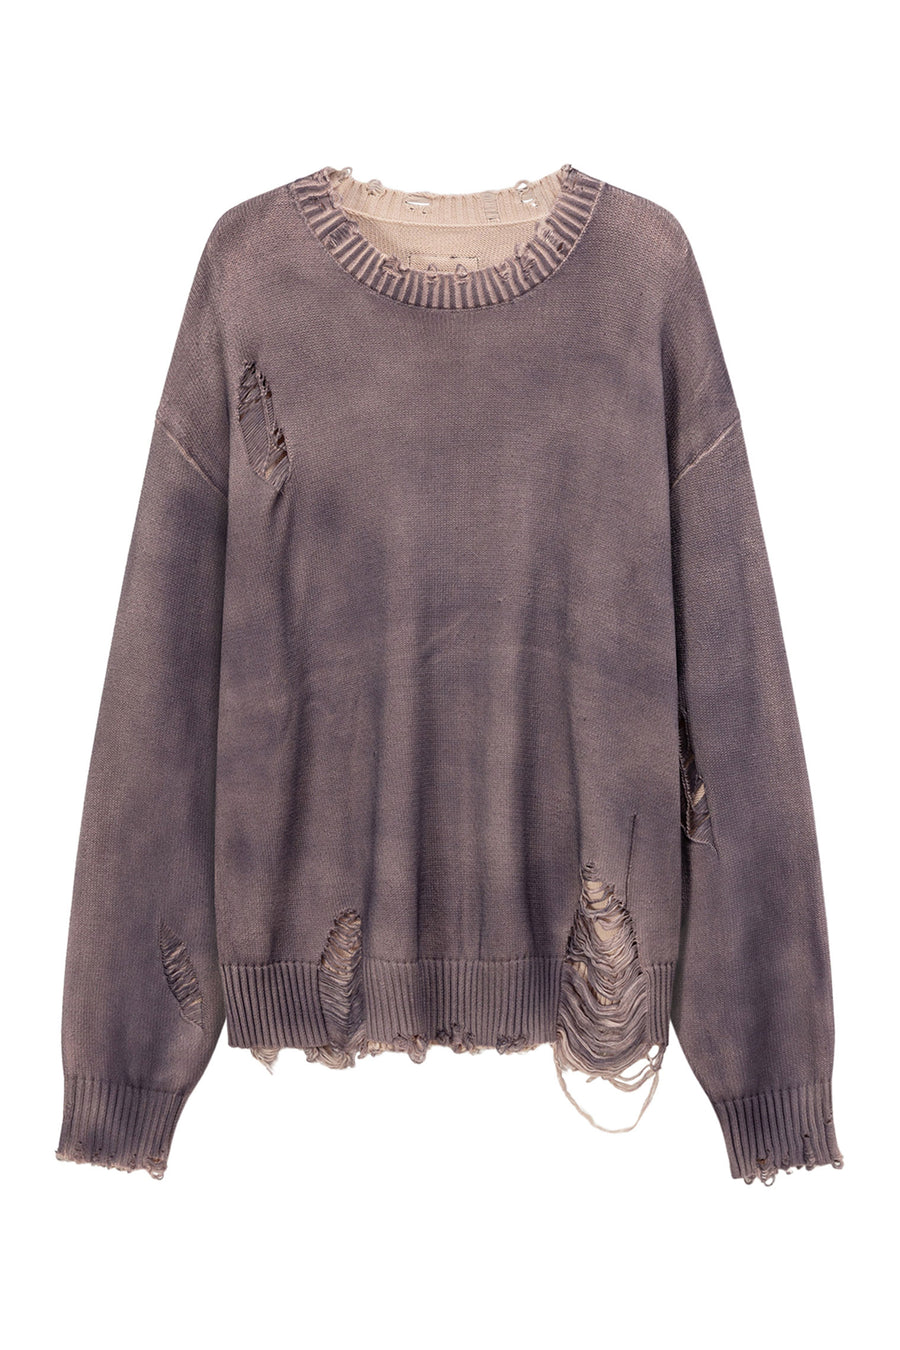 Loose Fit Knit Distressed Sweater